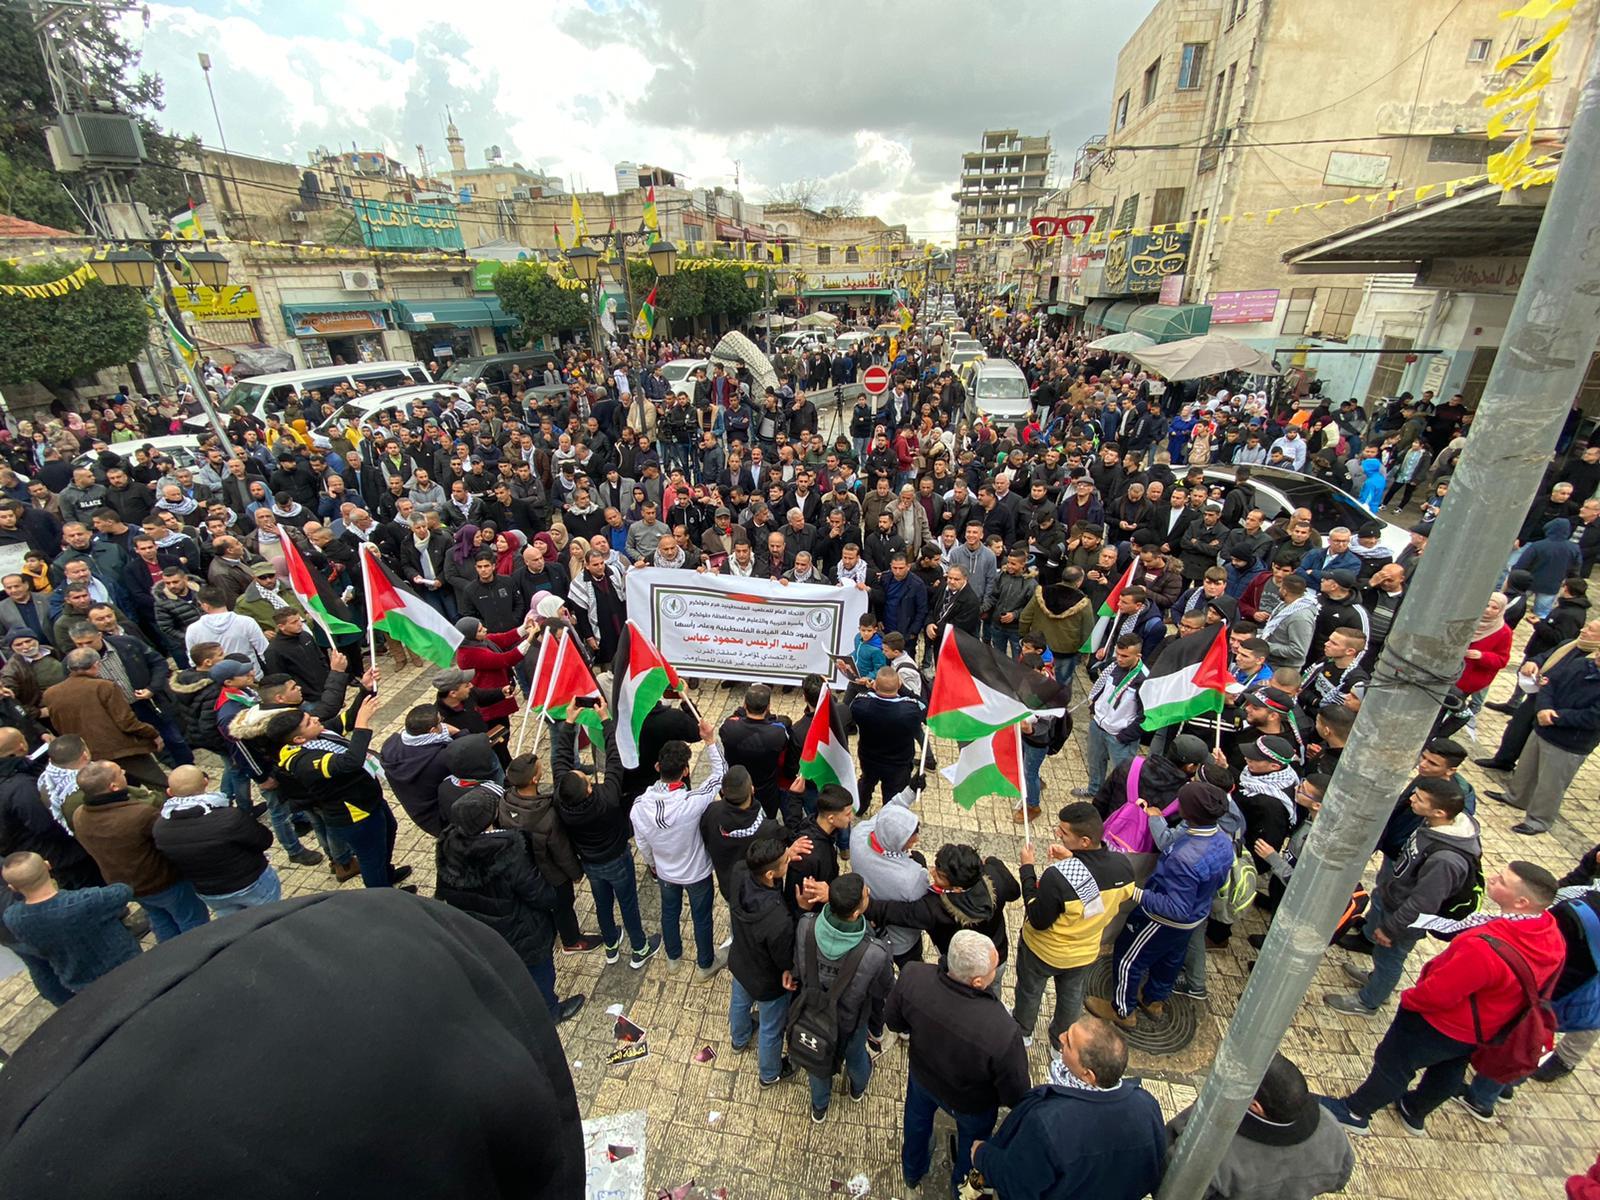 Protestors gathered in the West Bank city of Tul-Karem to oppose Trump's deal (MEE)